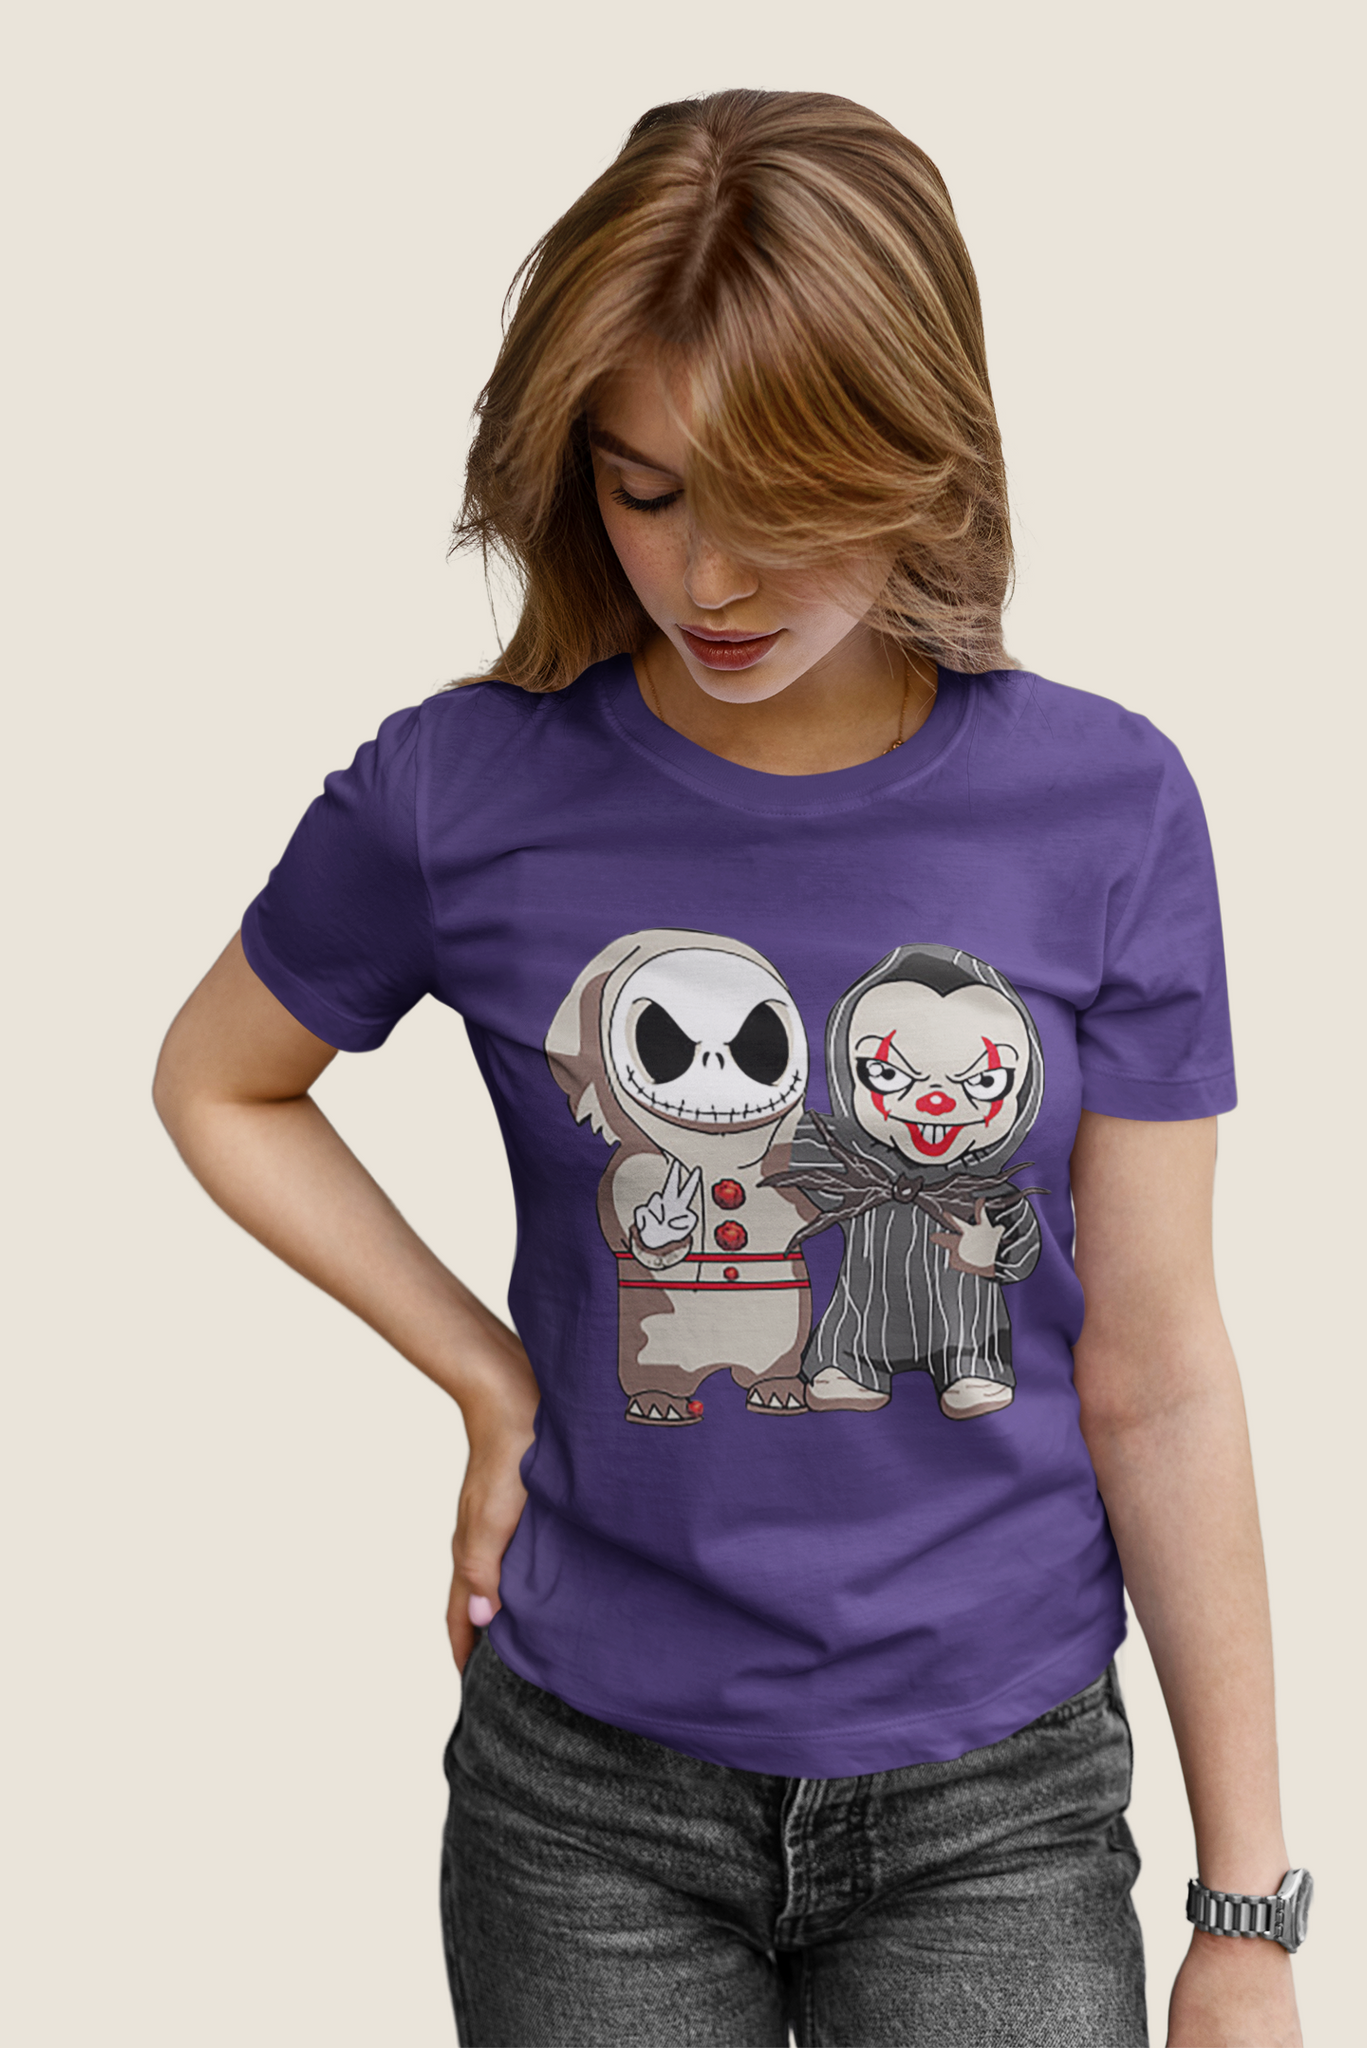 Nightmare Before Christmas T Shirt, Jack Skellington Pennywise Clown Exchange Costume T Shirt, Halloween Gifts